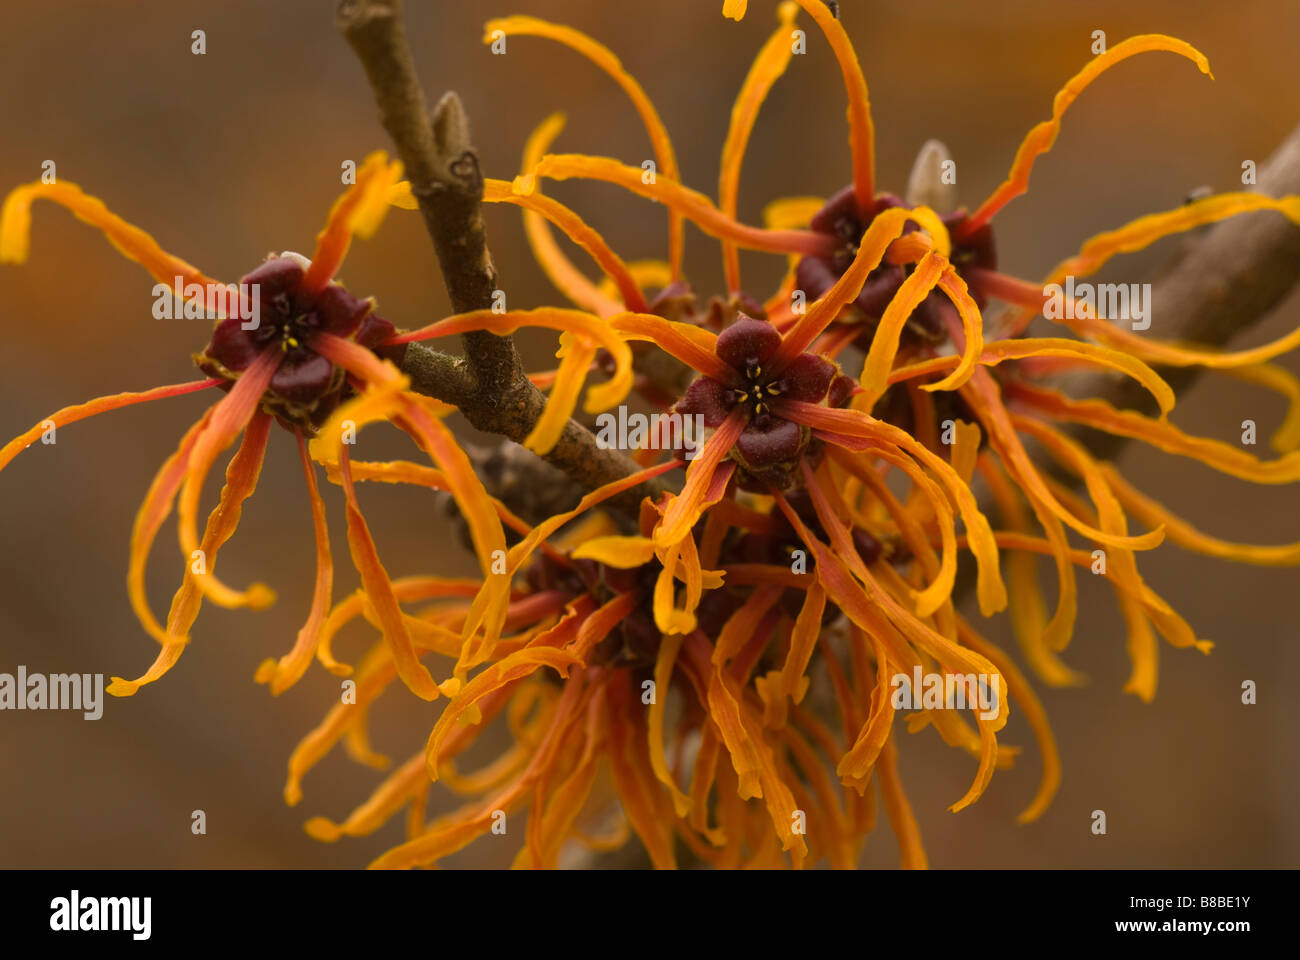 Close-up of Hamamelis x intermedia 'Jelena' (witch hazel) a shrub that blooms in late winter. Stock Photo